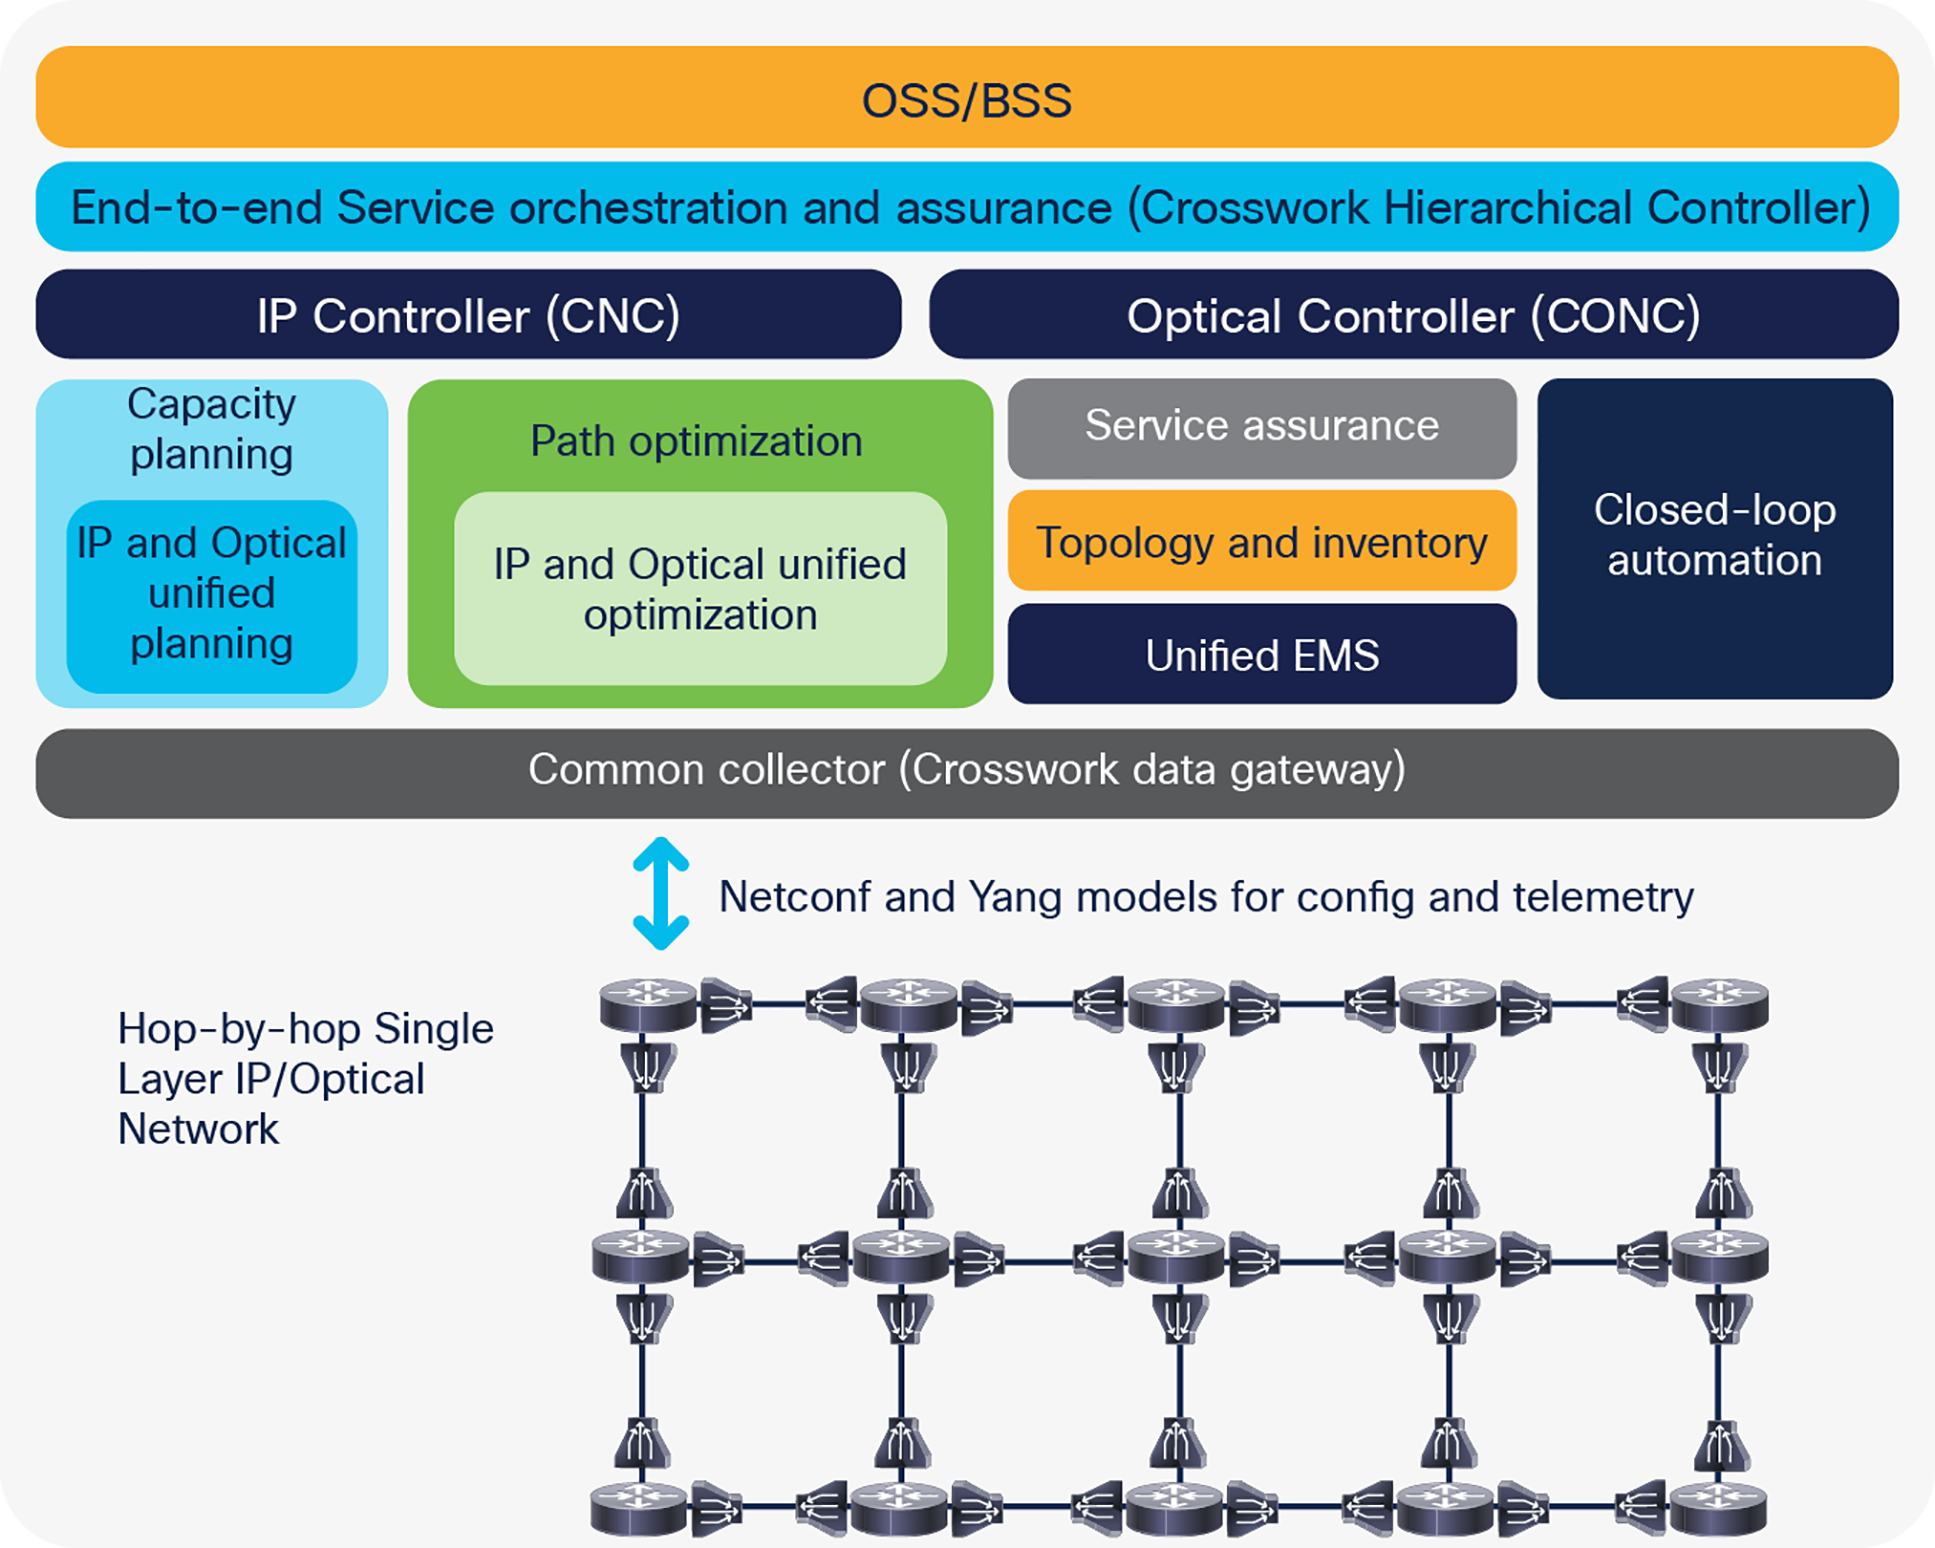 Cisco’s Routed Optical Networking’s control architecture with the Cisco Crosswork Hierarchical Controller